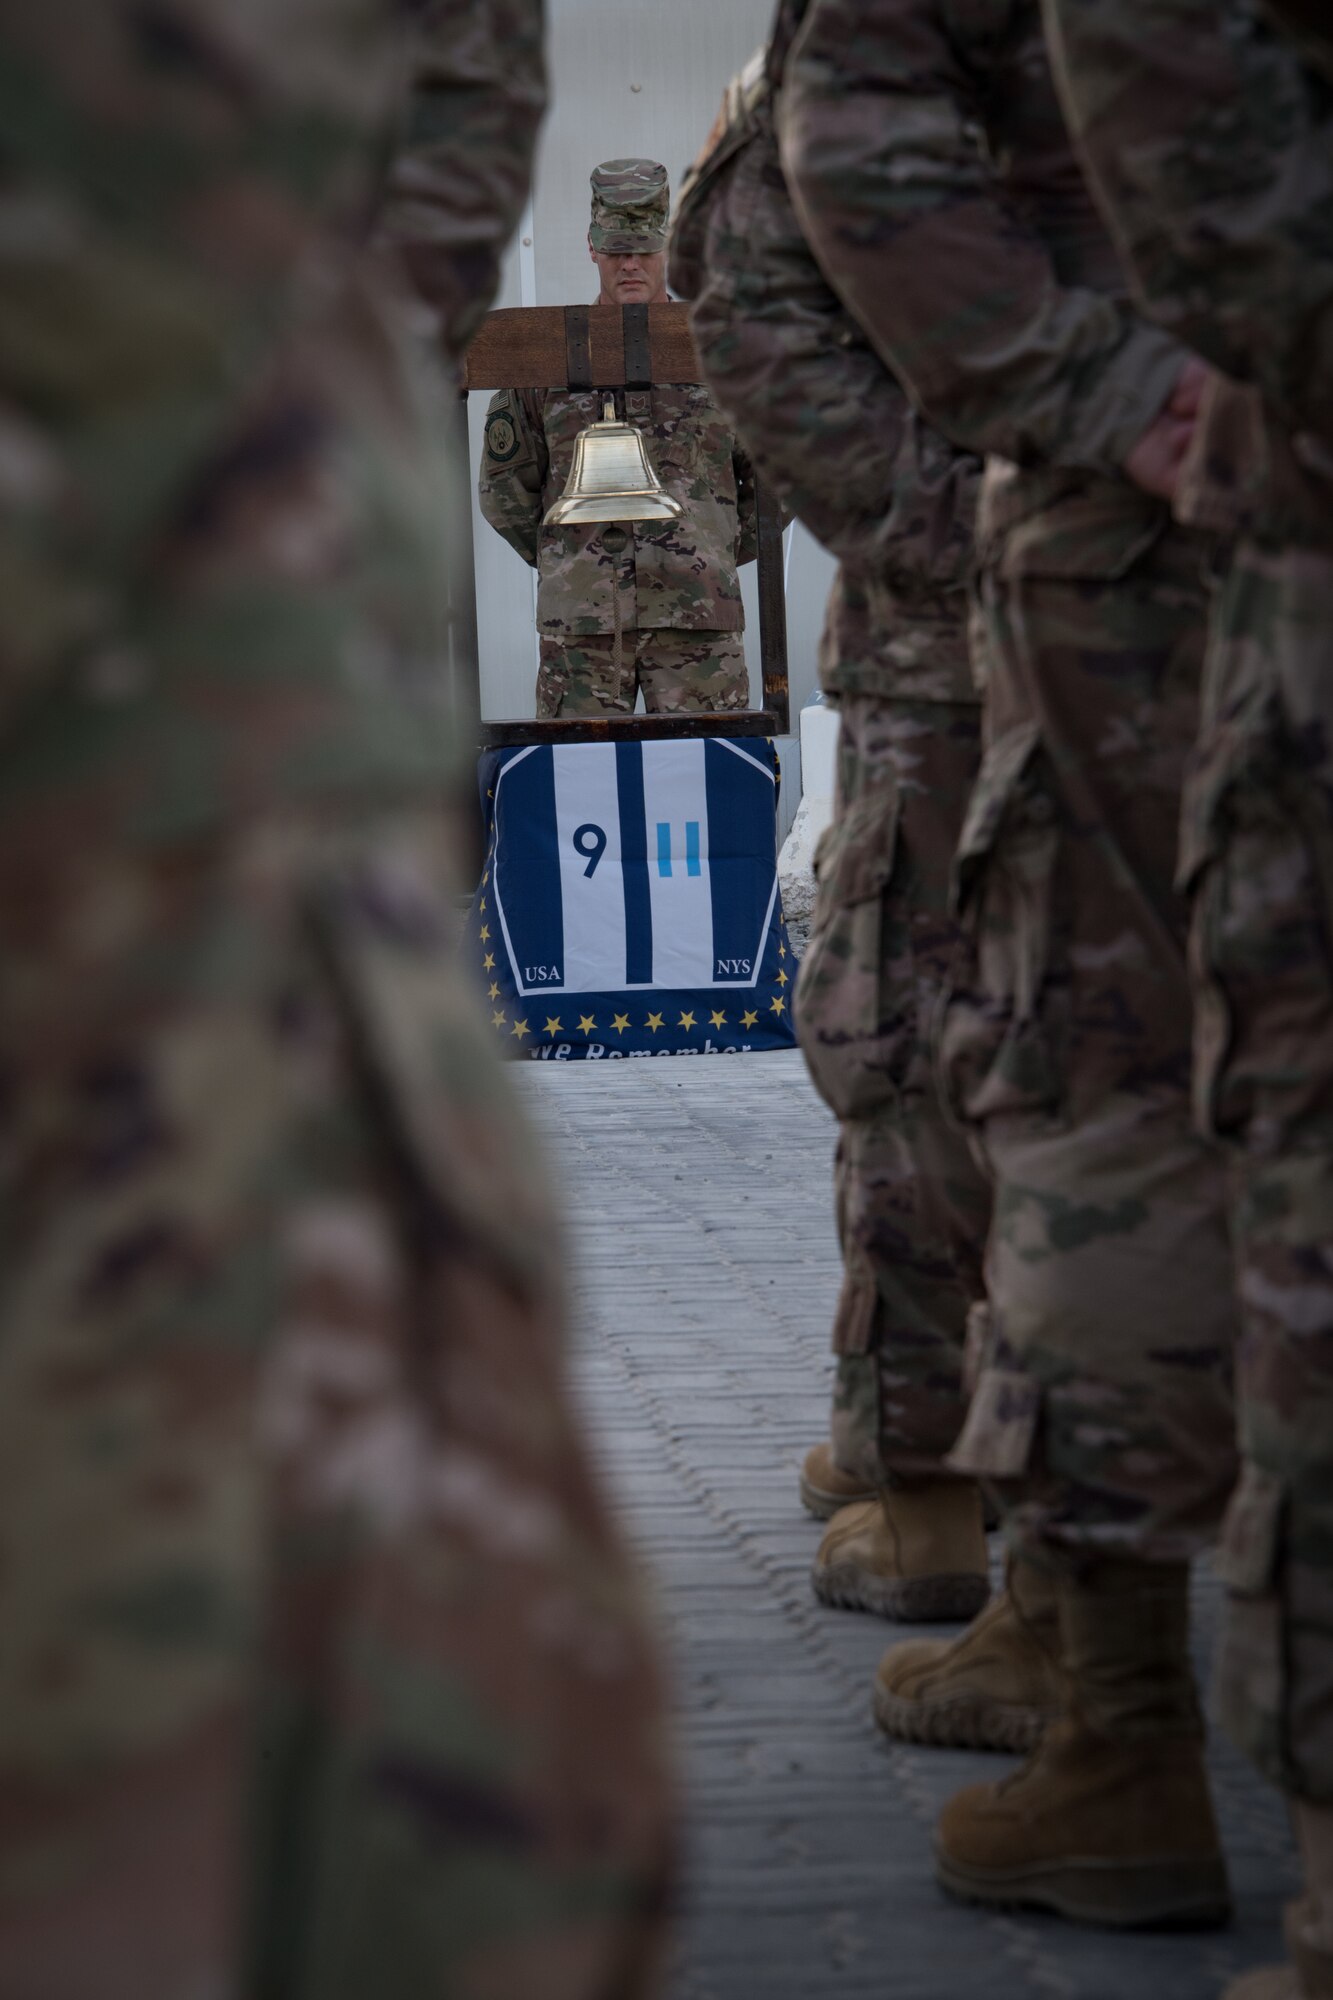 U.S. Airmen, Soldiers and coalition partners from the from the 380th Air Expeditionary Wing honored first responders who died in the line of duty during the terrorist attack on the World Trade Center during a retreat ceremony at Al Dhafra Air Base, United Arab Emirates, Sept. 11, 2018.  (U.S. Air Force photo by Tech. Sgt. Nieko Carzis)